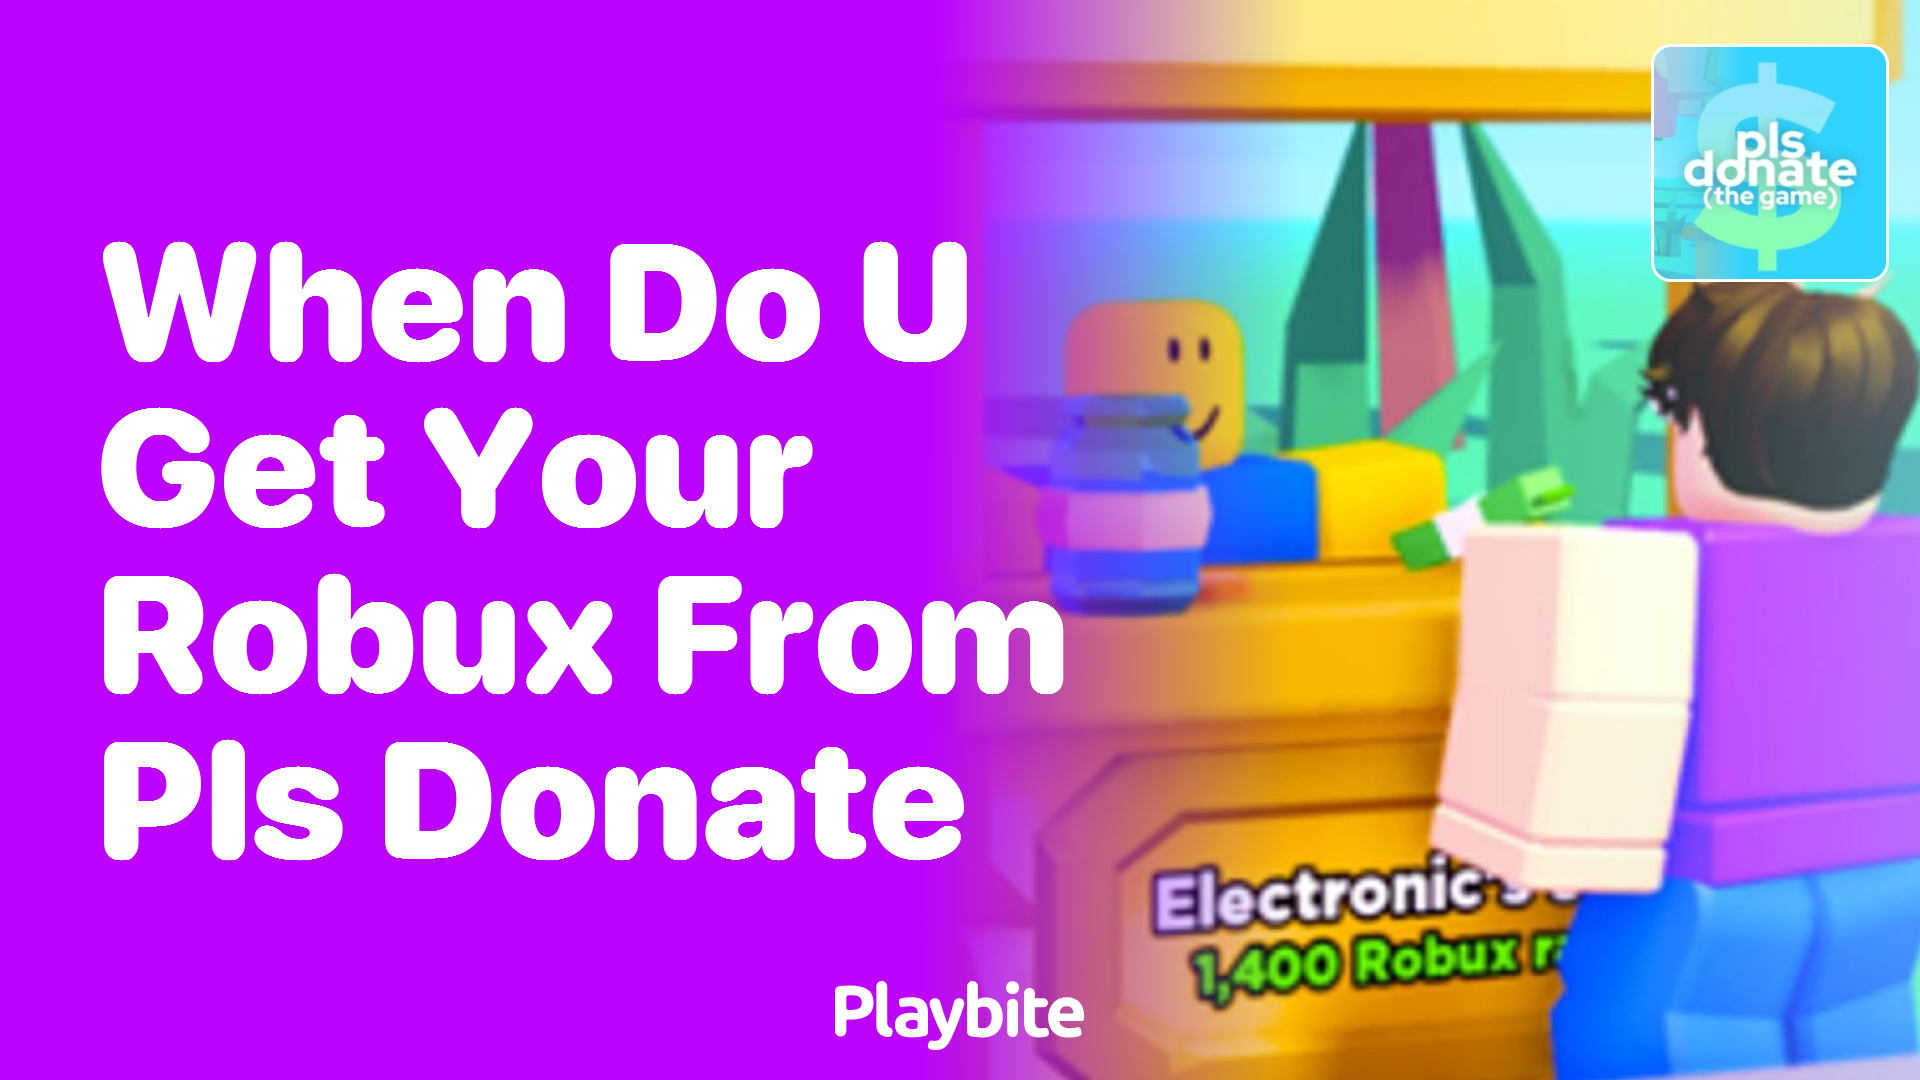 When Do You Get Your Robux from PLS DONATE?